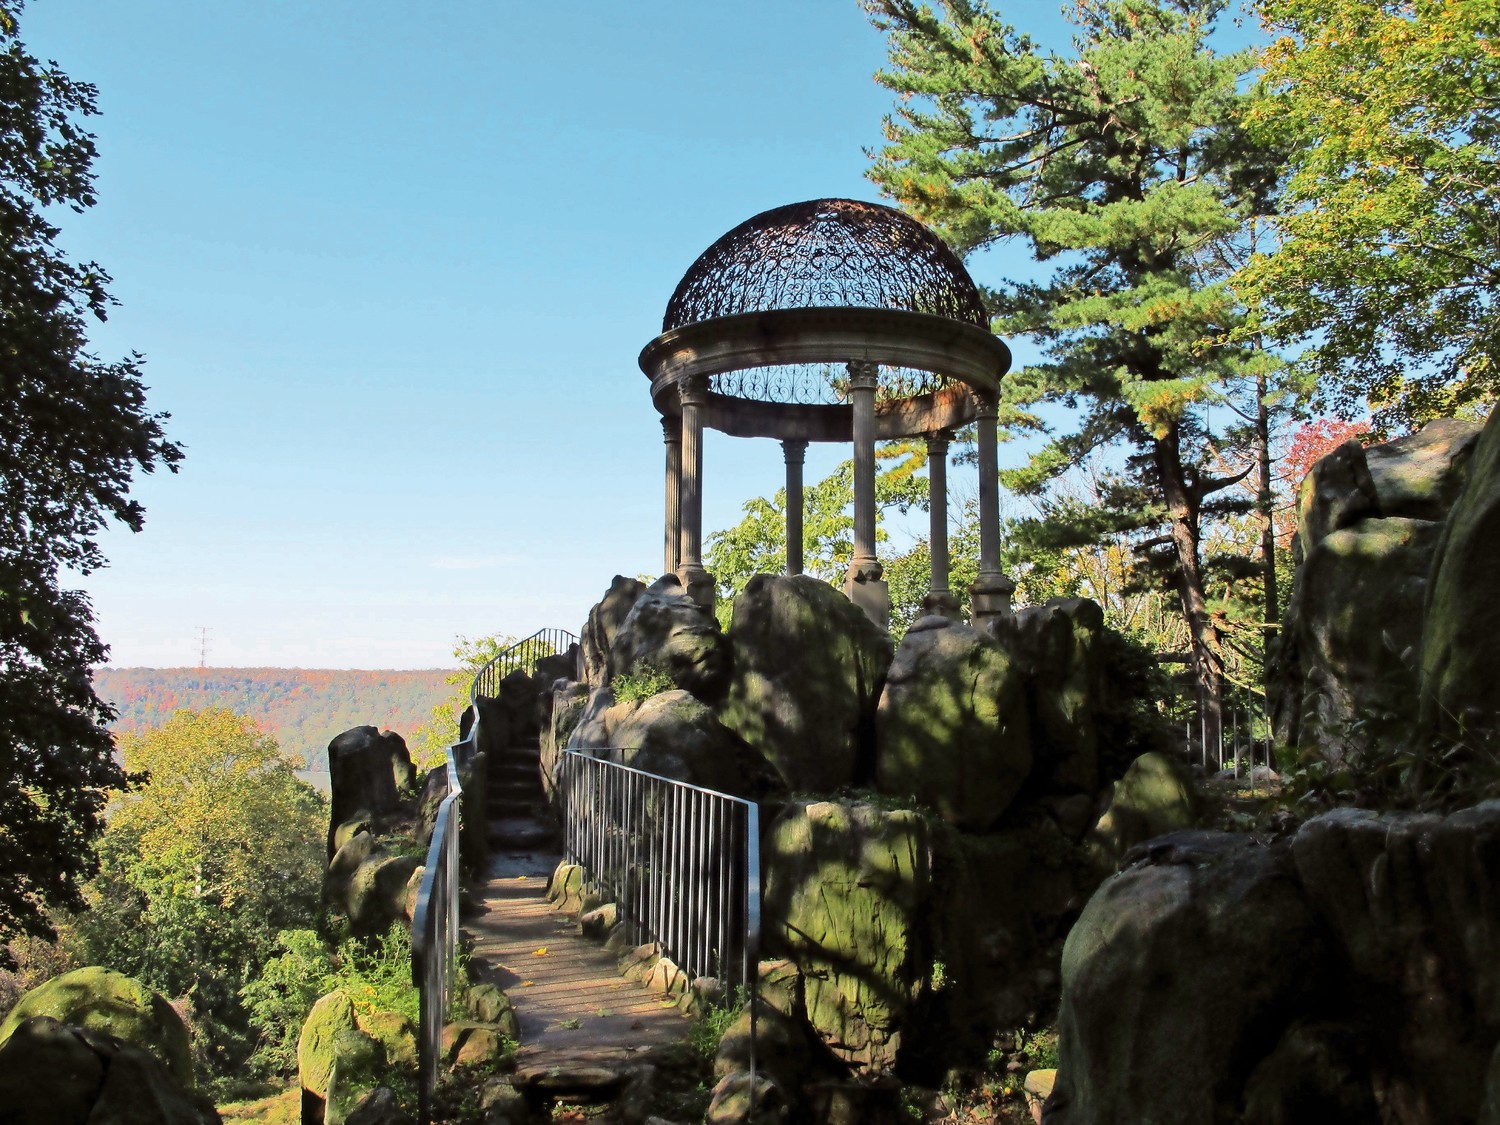 There is a lot of history at Untermeyer Gardens in Yonkers, dating back to wealthy hat manufacturer John Waring and culminating with lawyer Samuel Untermeyer.